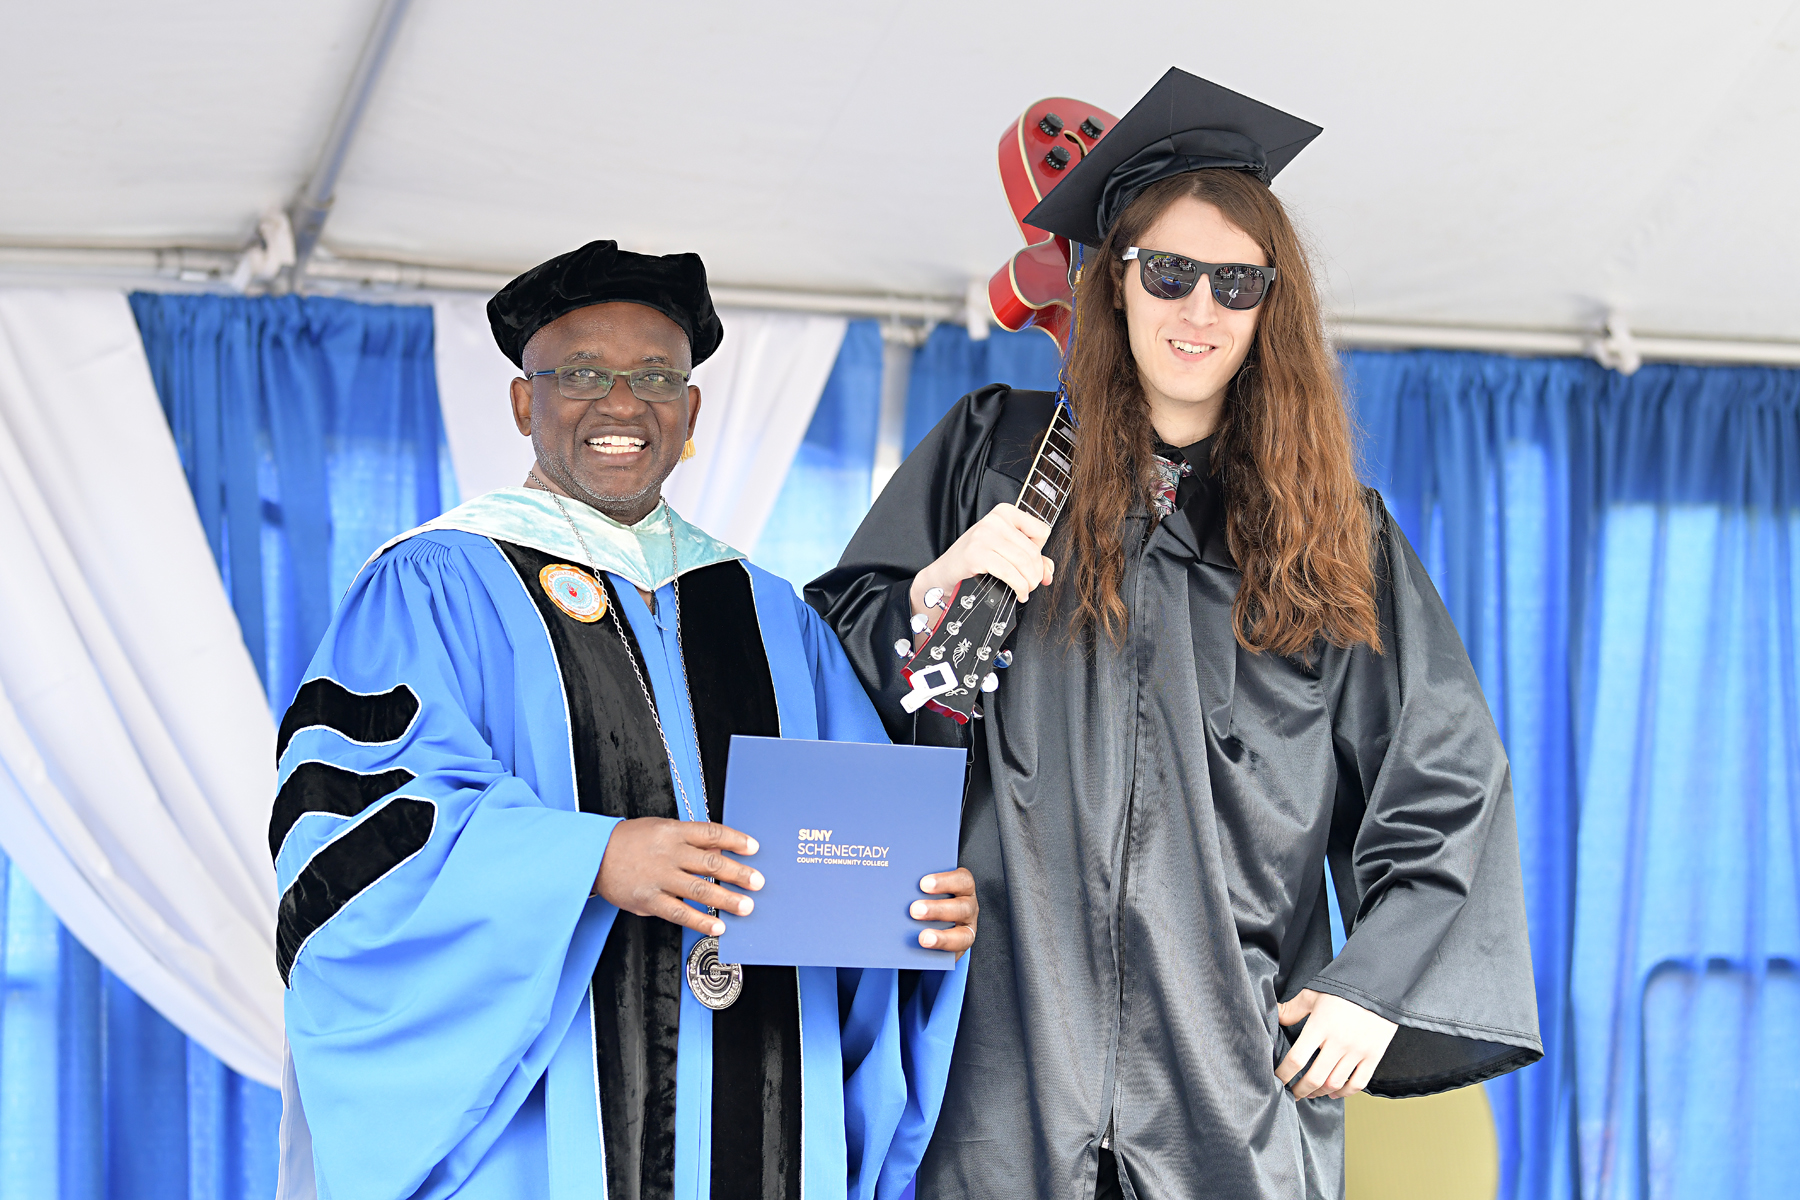 Graduate on stage holding guitar, standing with Dr. Moono